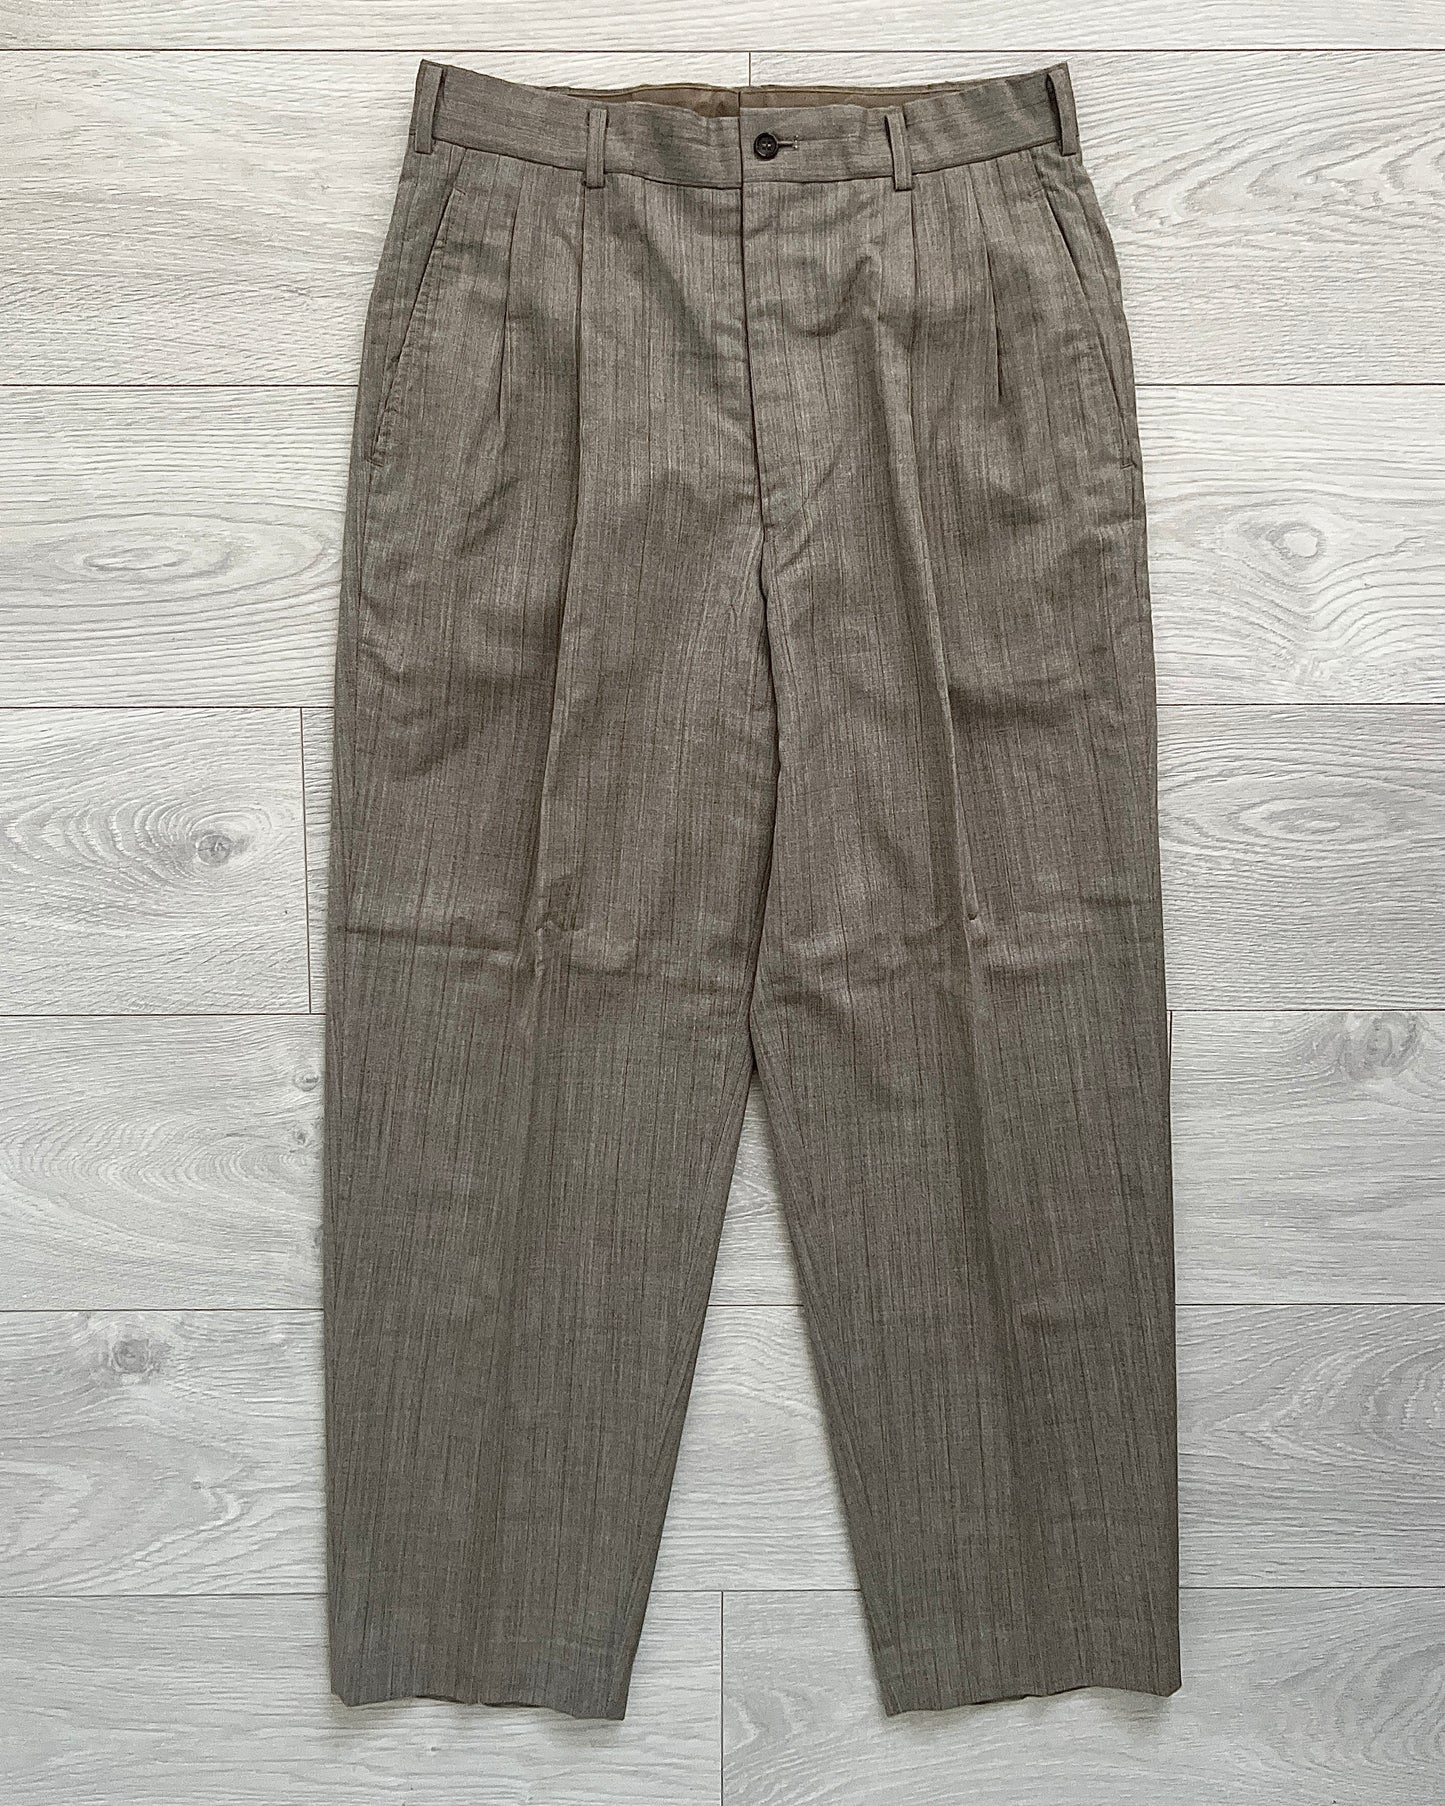 Comme Des Garcons Homme Plus AD1991 Wool Pleated Trousers - Size 30